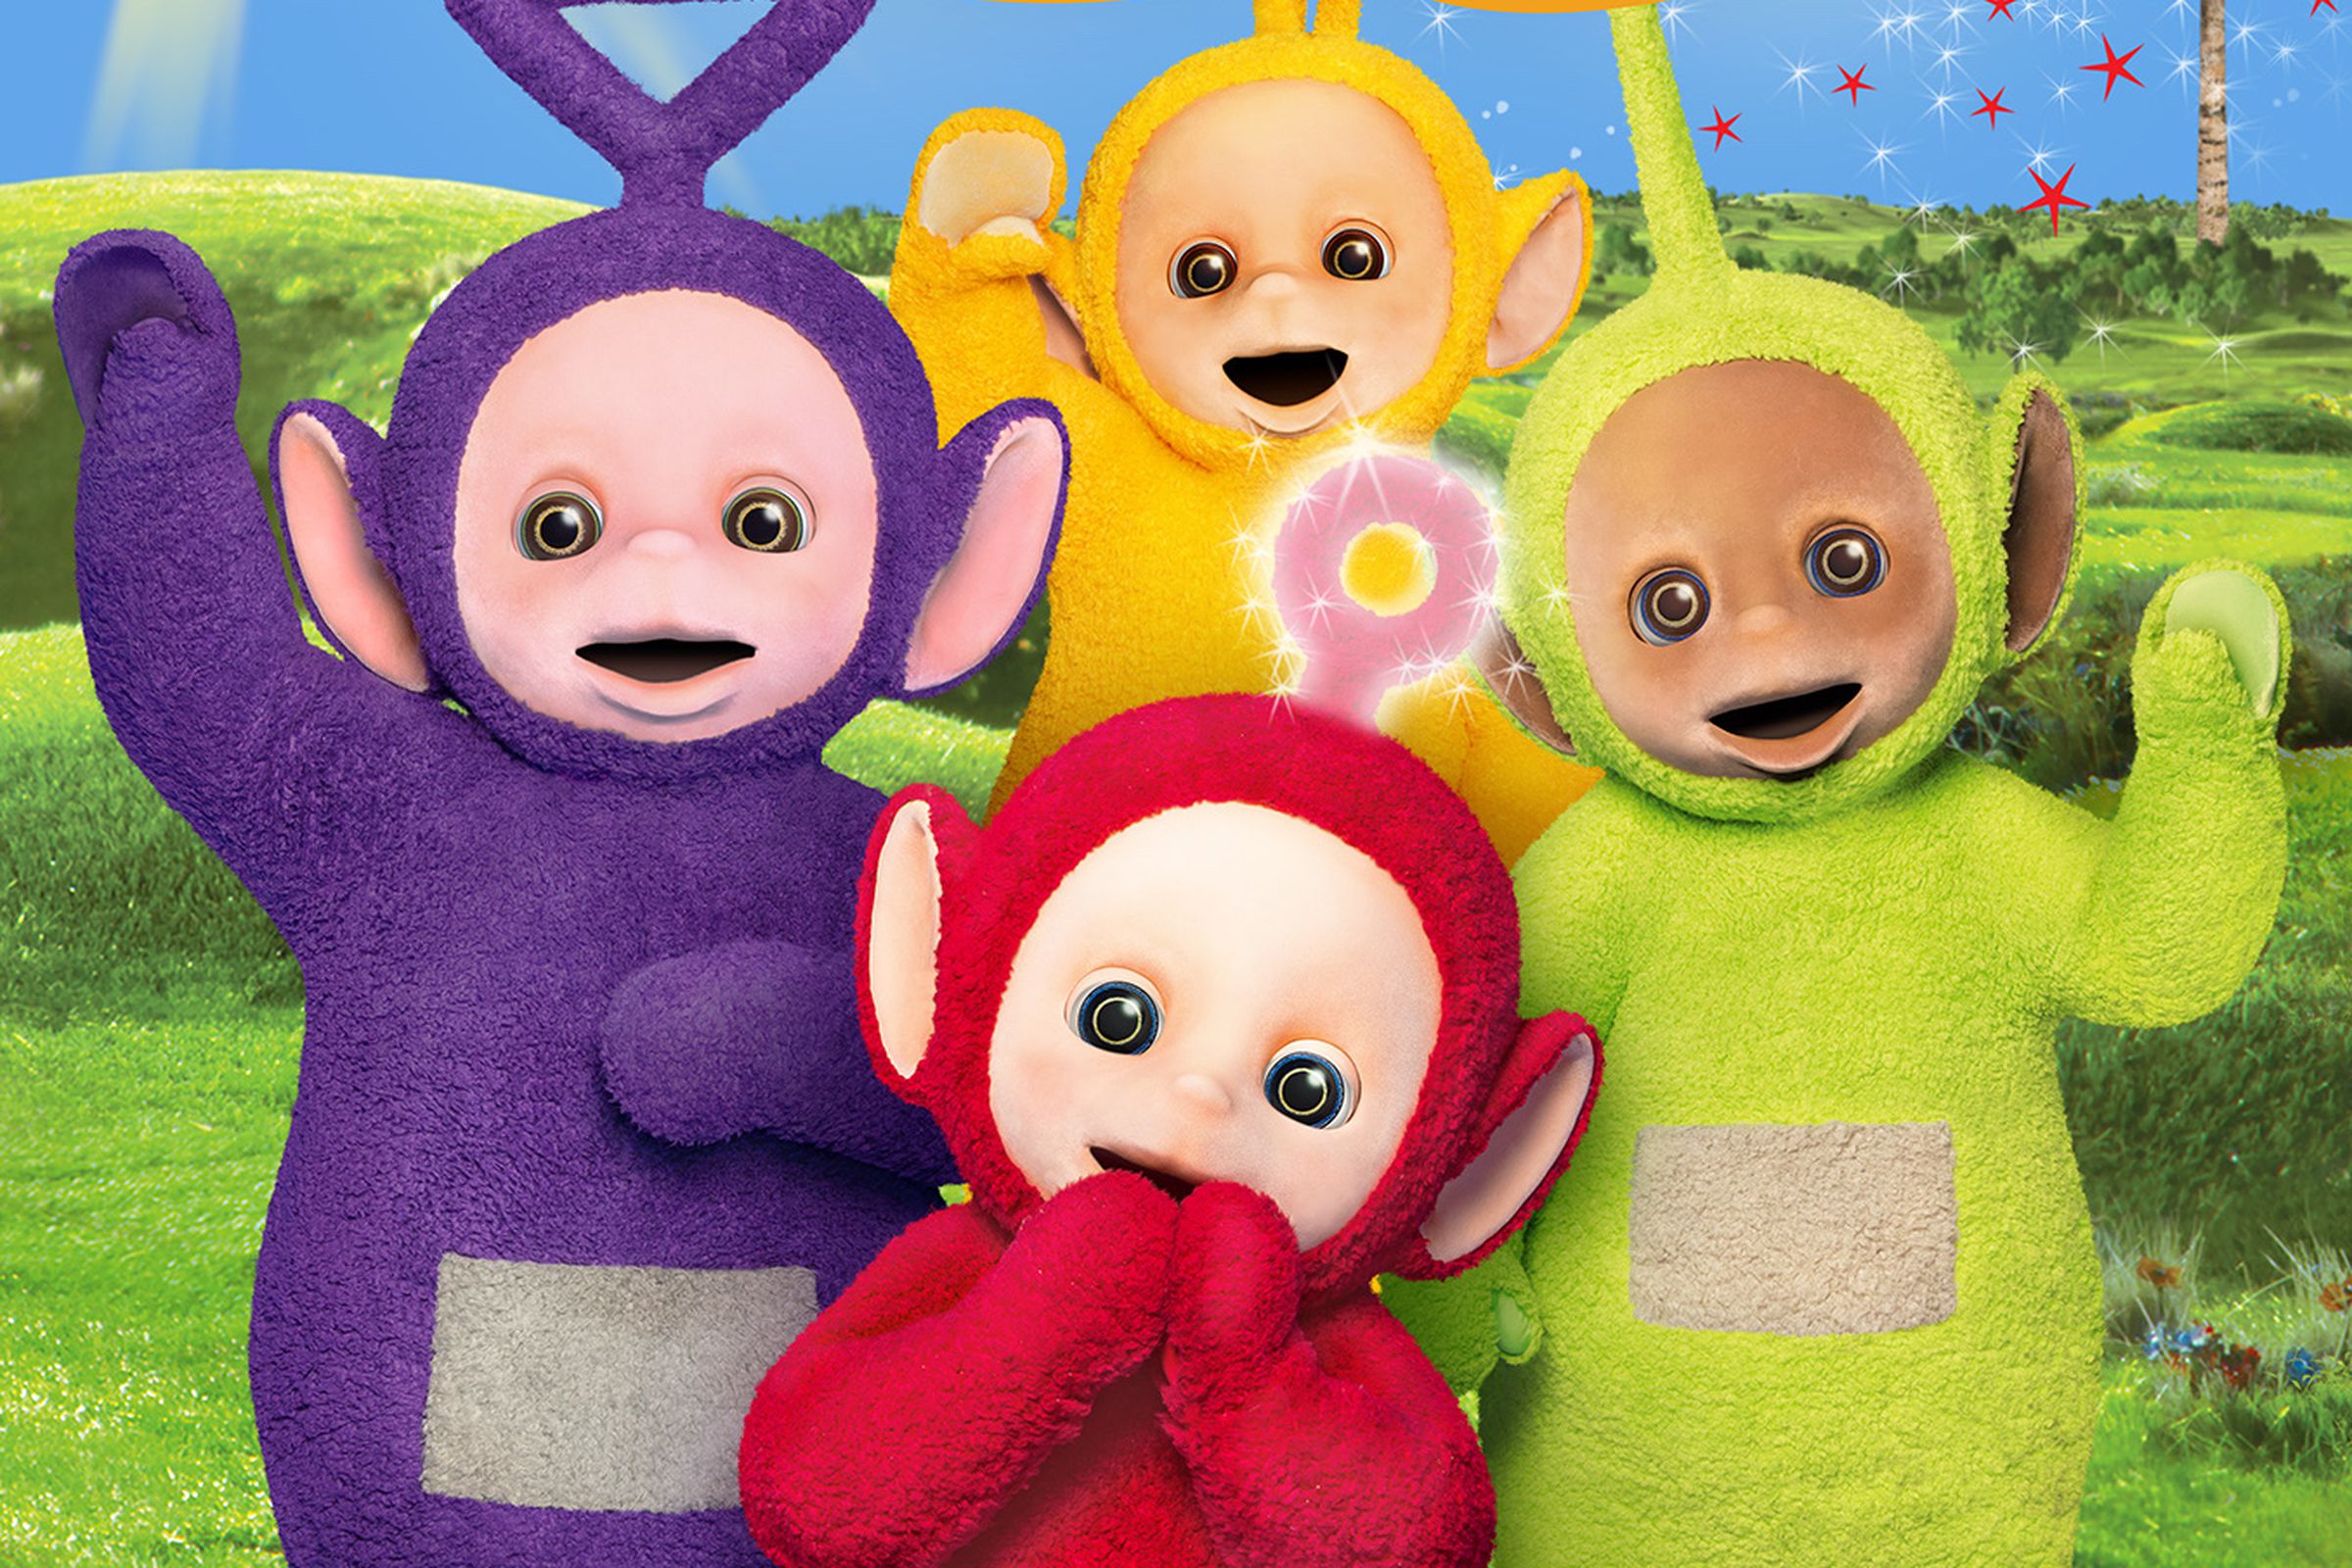 A group of aliens — one purple, one yellow, one green and one red, smiling and waving from a scenic vista as a sun with a face and a man smile down on them from above.